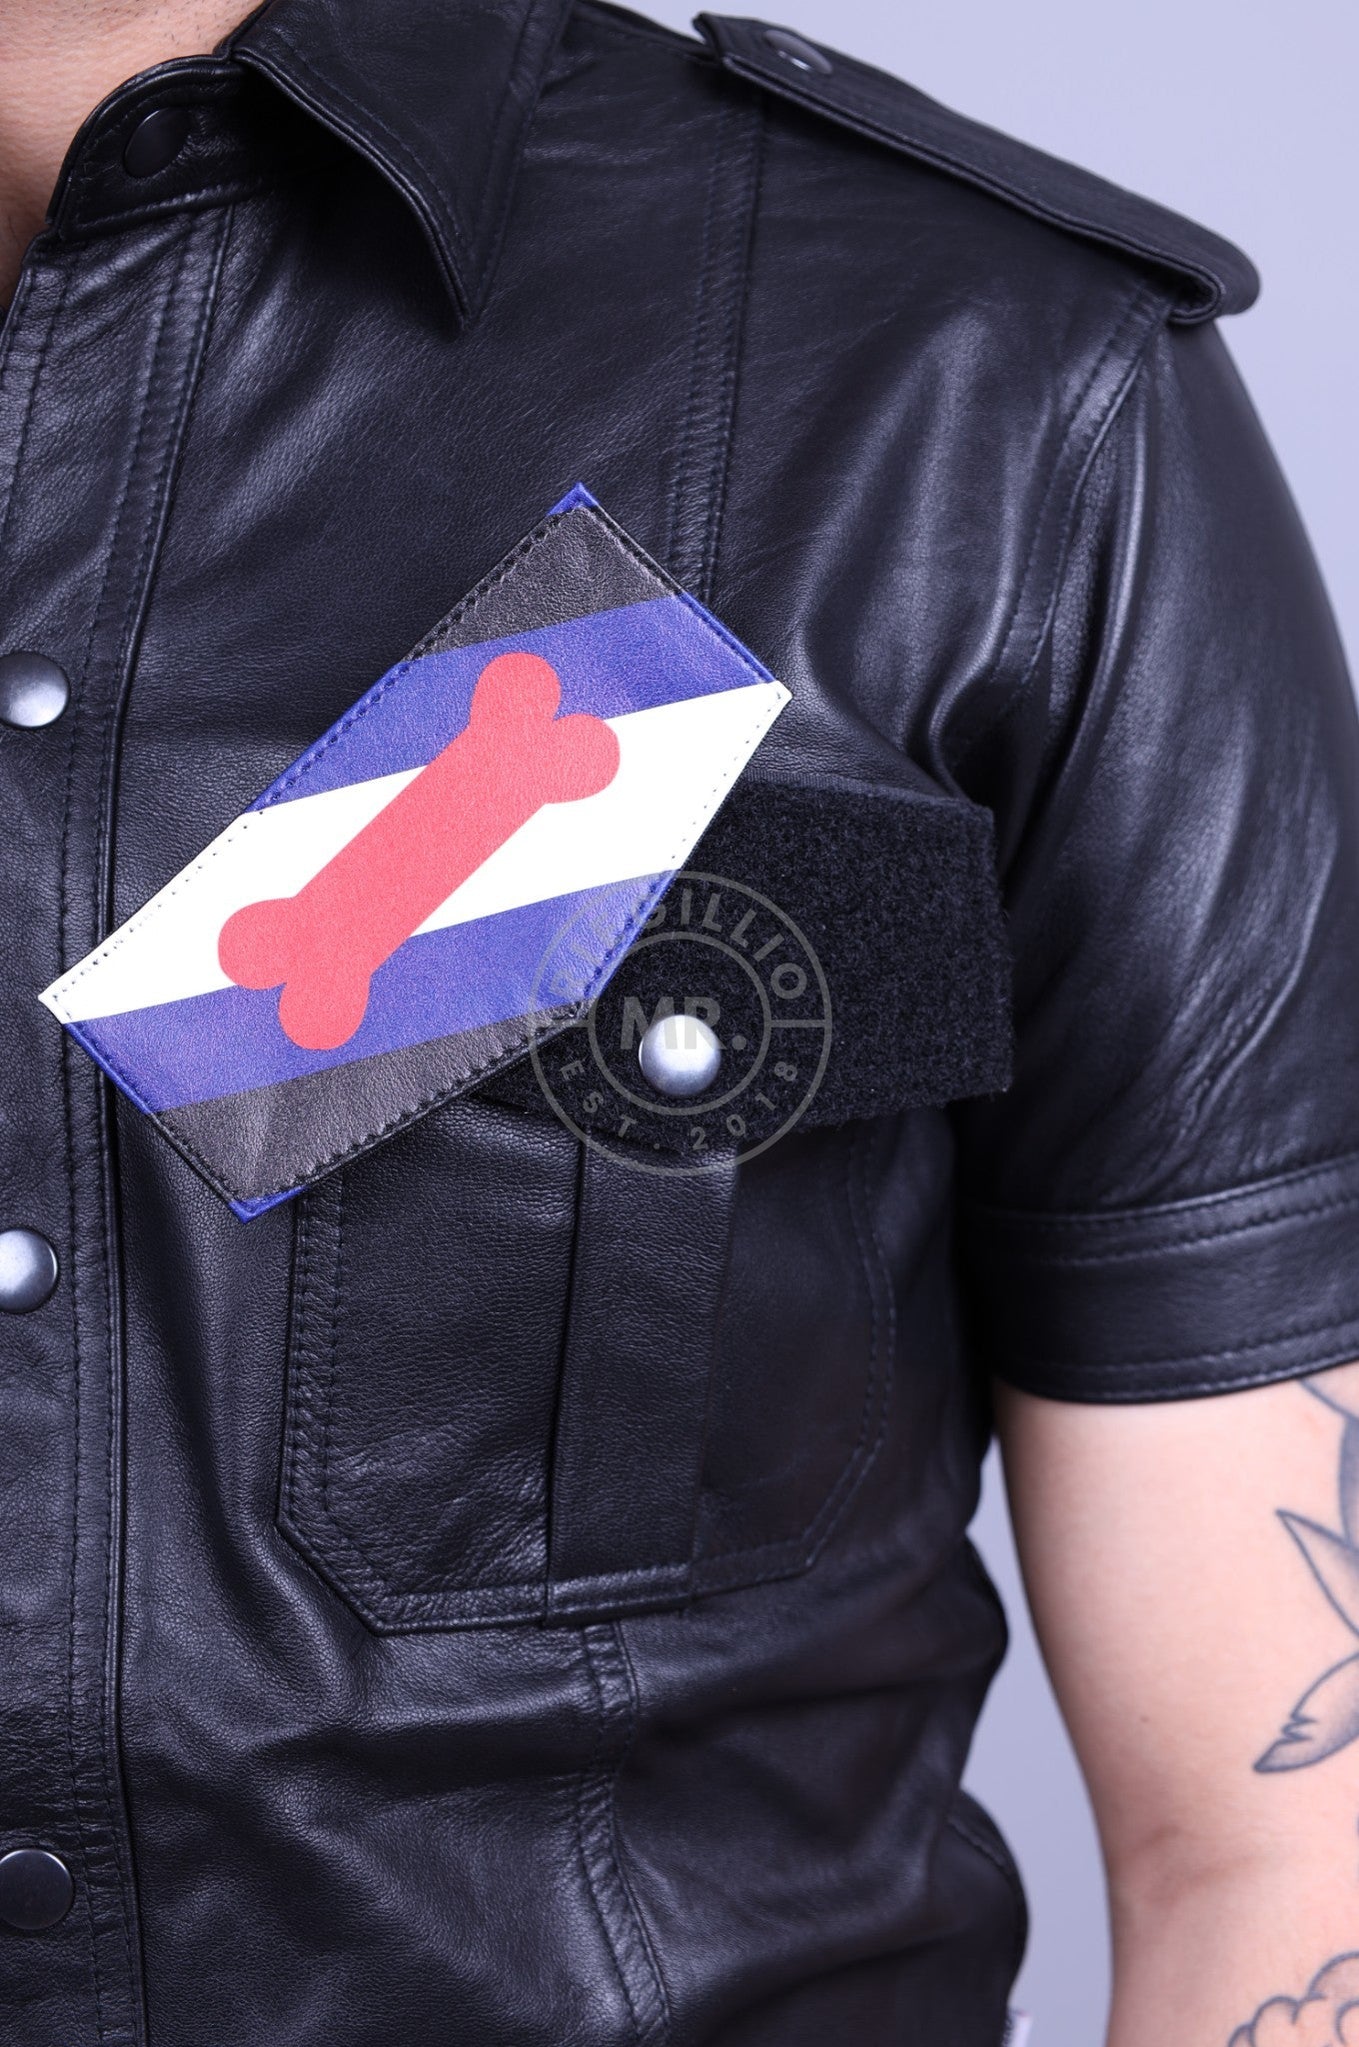 Velcro Patch - Puppy Flag